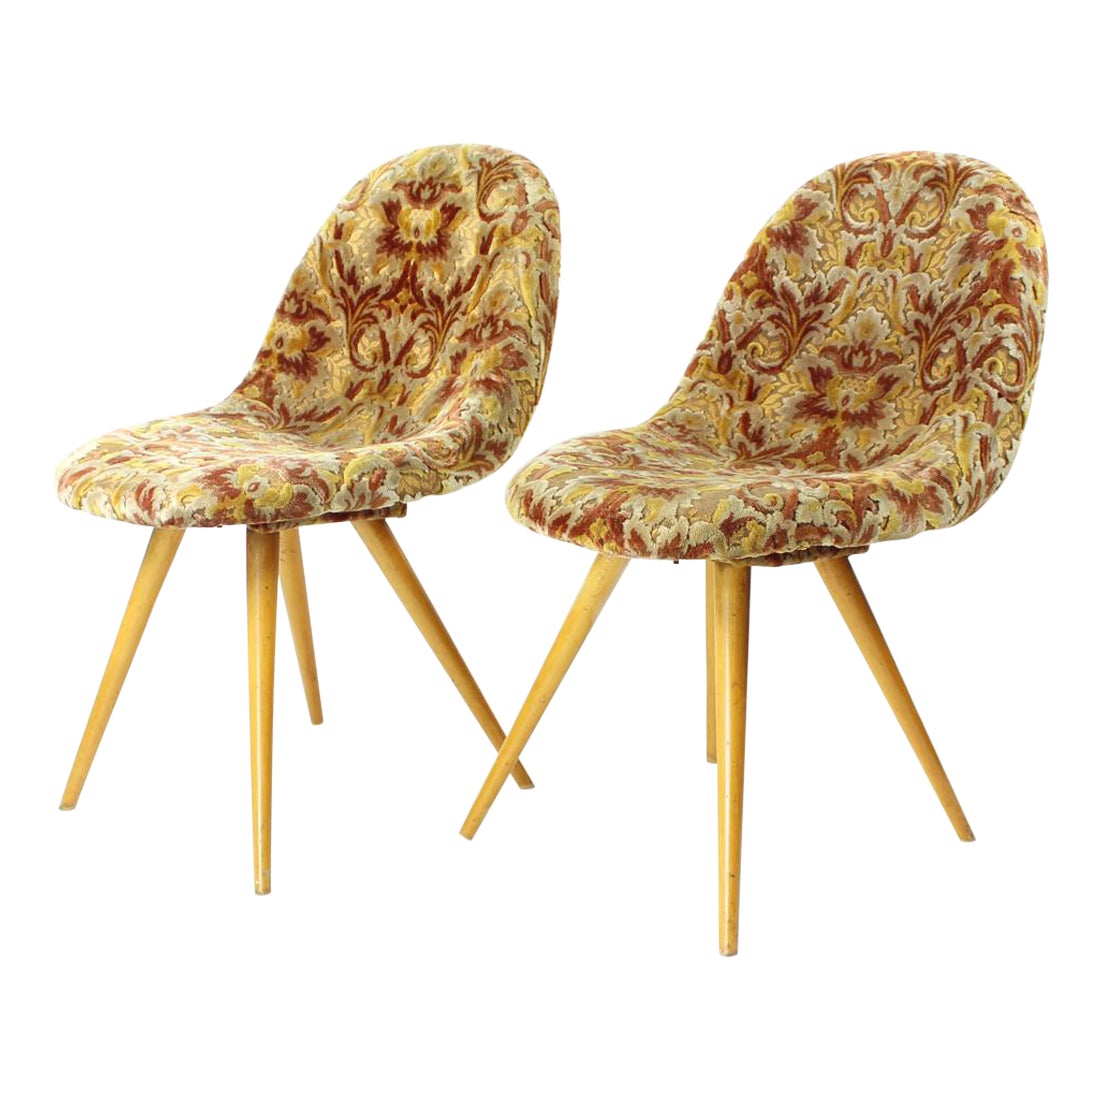 Pair Of Midcentury Shell Chairs By Miroslav Navratil, Czechoslovakia 1960s For Sale